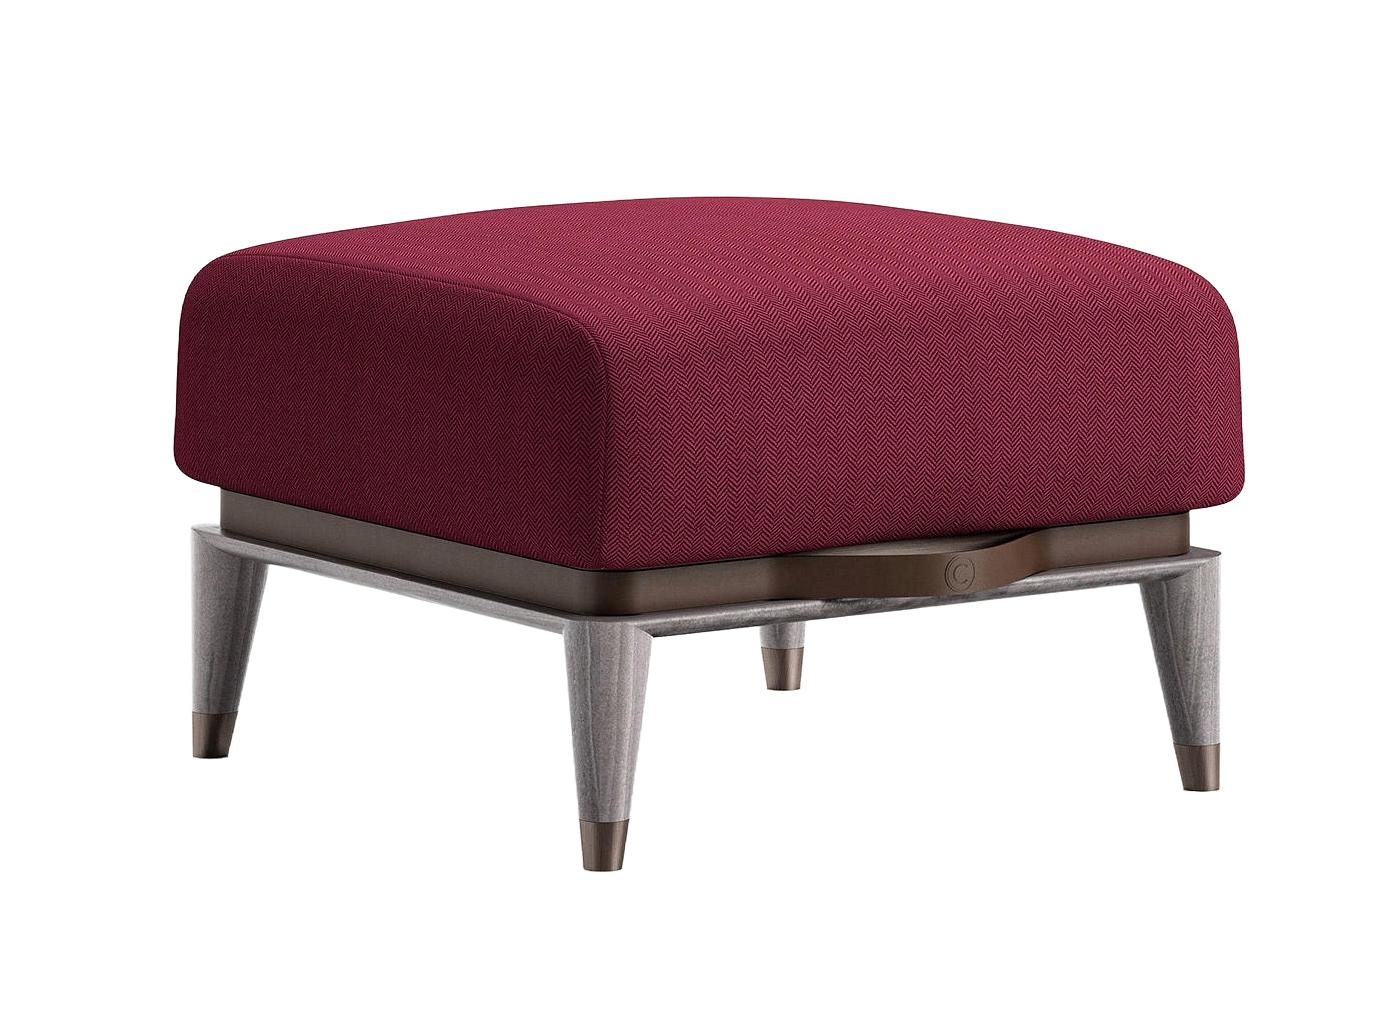 Footstool with Plush Upholstery